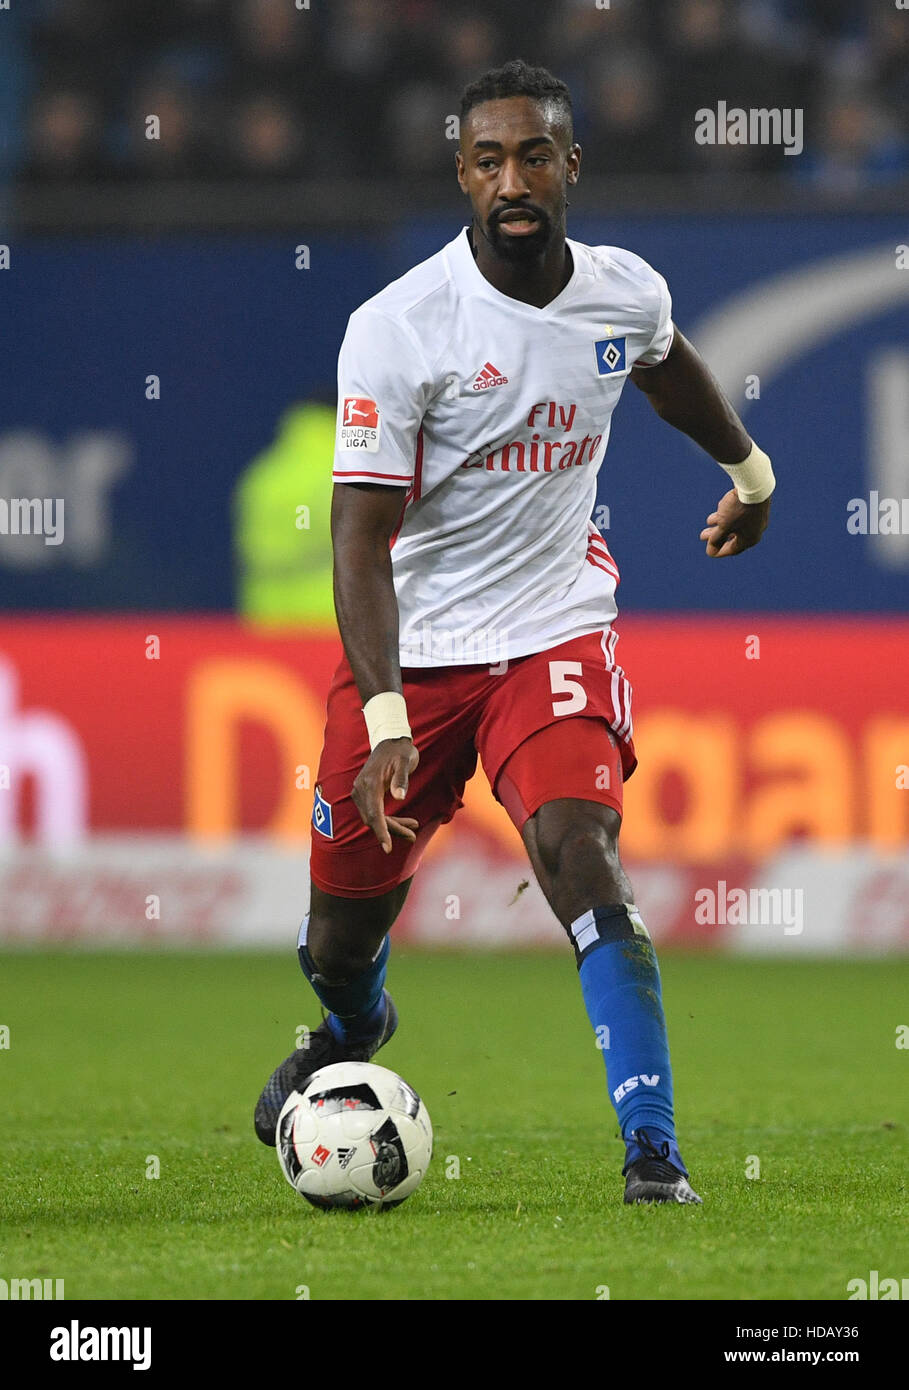 Hamburg's Johan Djourou passeds a ball during the German Bundesliga football match between Hamburg SV and FC Augsburg at the Volksparkstadion in Hamburg, Germany, 10 December 2016. The game ended 1:0 win to Hamburg.       (EMBARGO CONDITIONS - ATTENTION: Due to the accreditation guidelines, the DFL only permits the publication and utilisation of up to 15 pictures per match on the internet and in online media during the match.) Photo: Axel Heimken/dpa Stock Photo